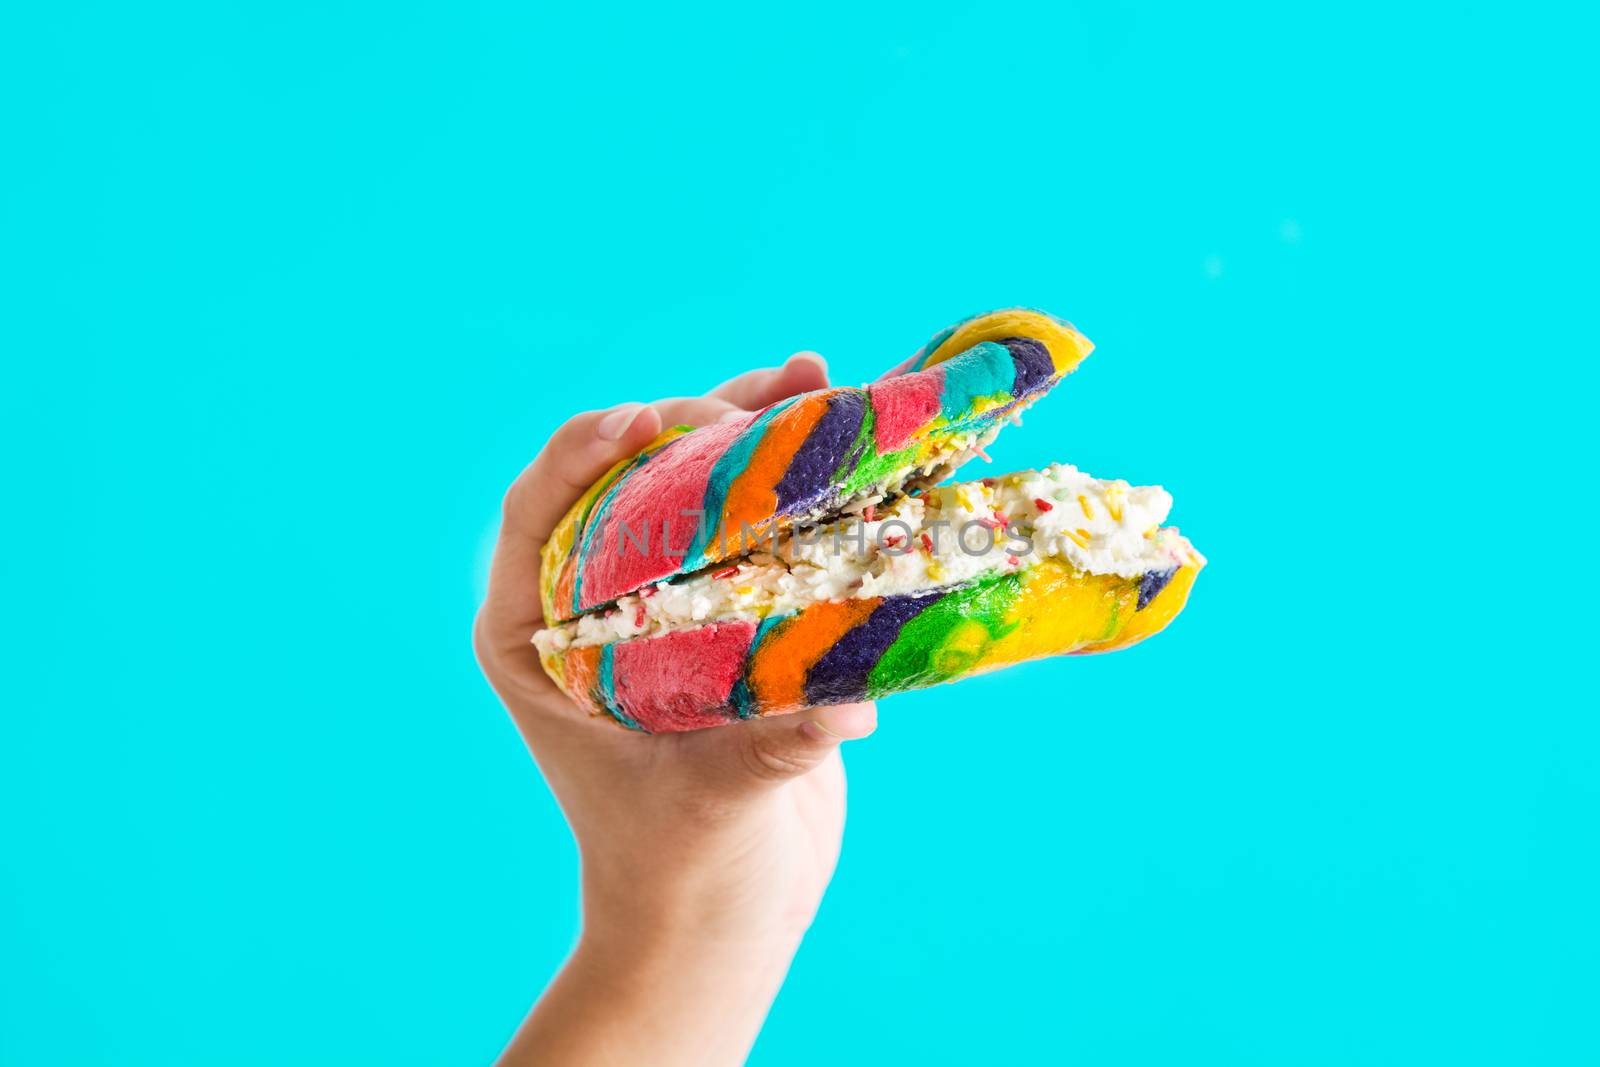 Colorful bagel with cheese and sprinkles in hand on blue background by chandlervid85